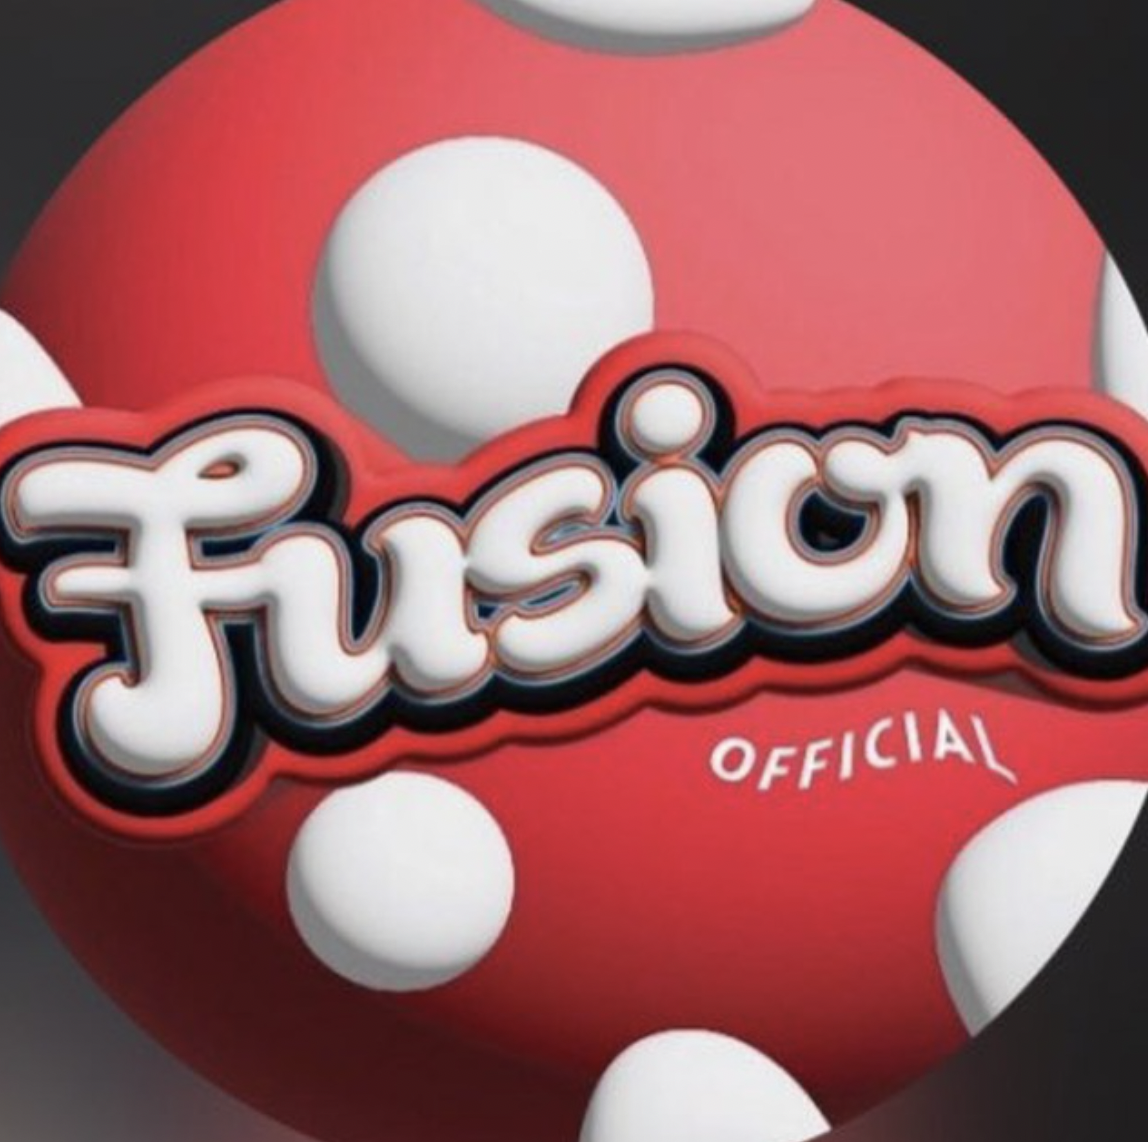 Fusion Bars Official